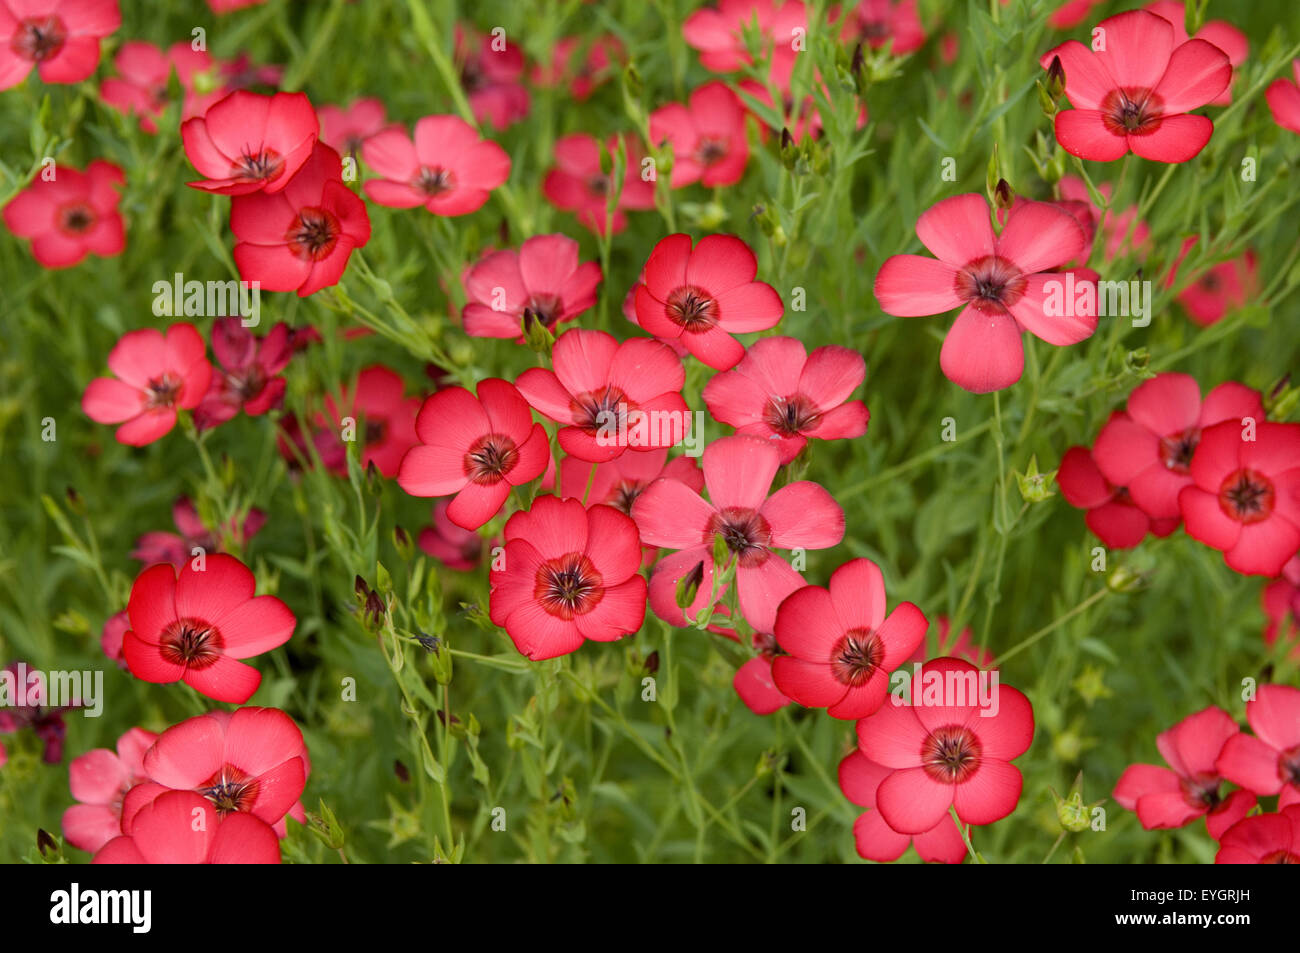 Roter Lein, Rubrum, Stock Photo